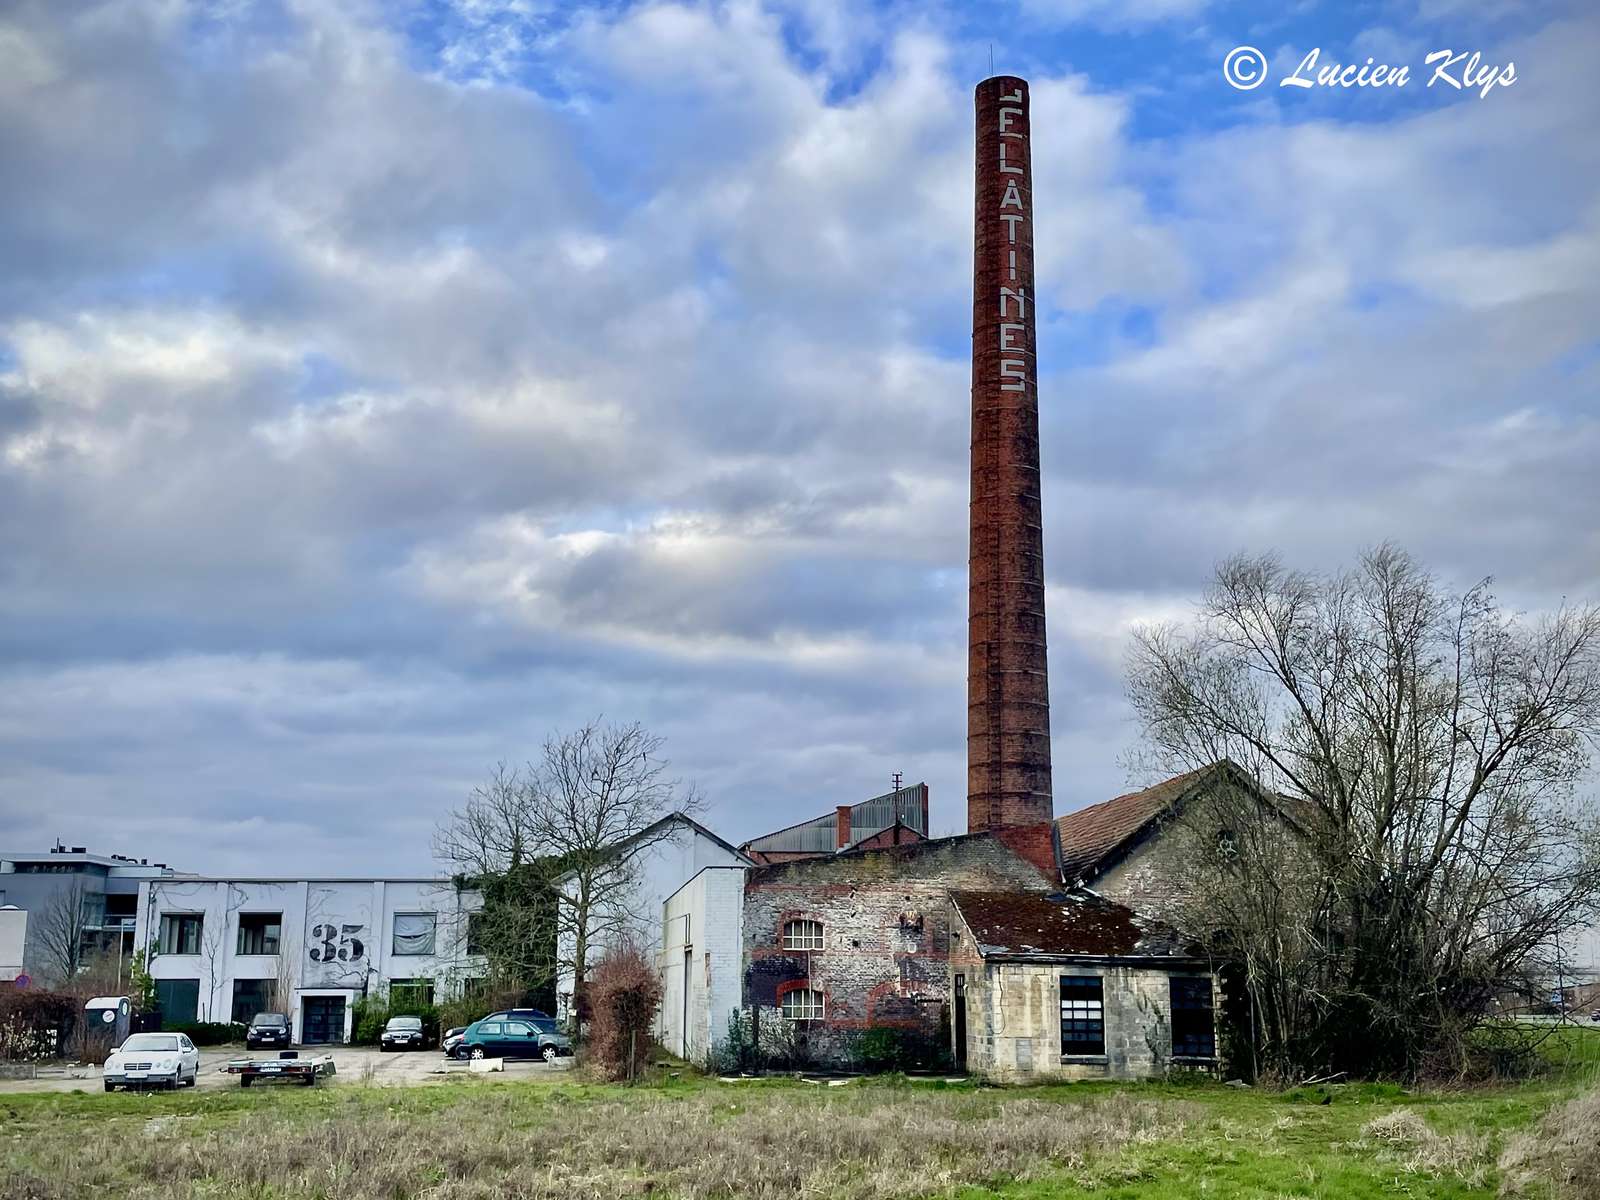 Gelatin factory Hasselt puzzle online from photo